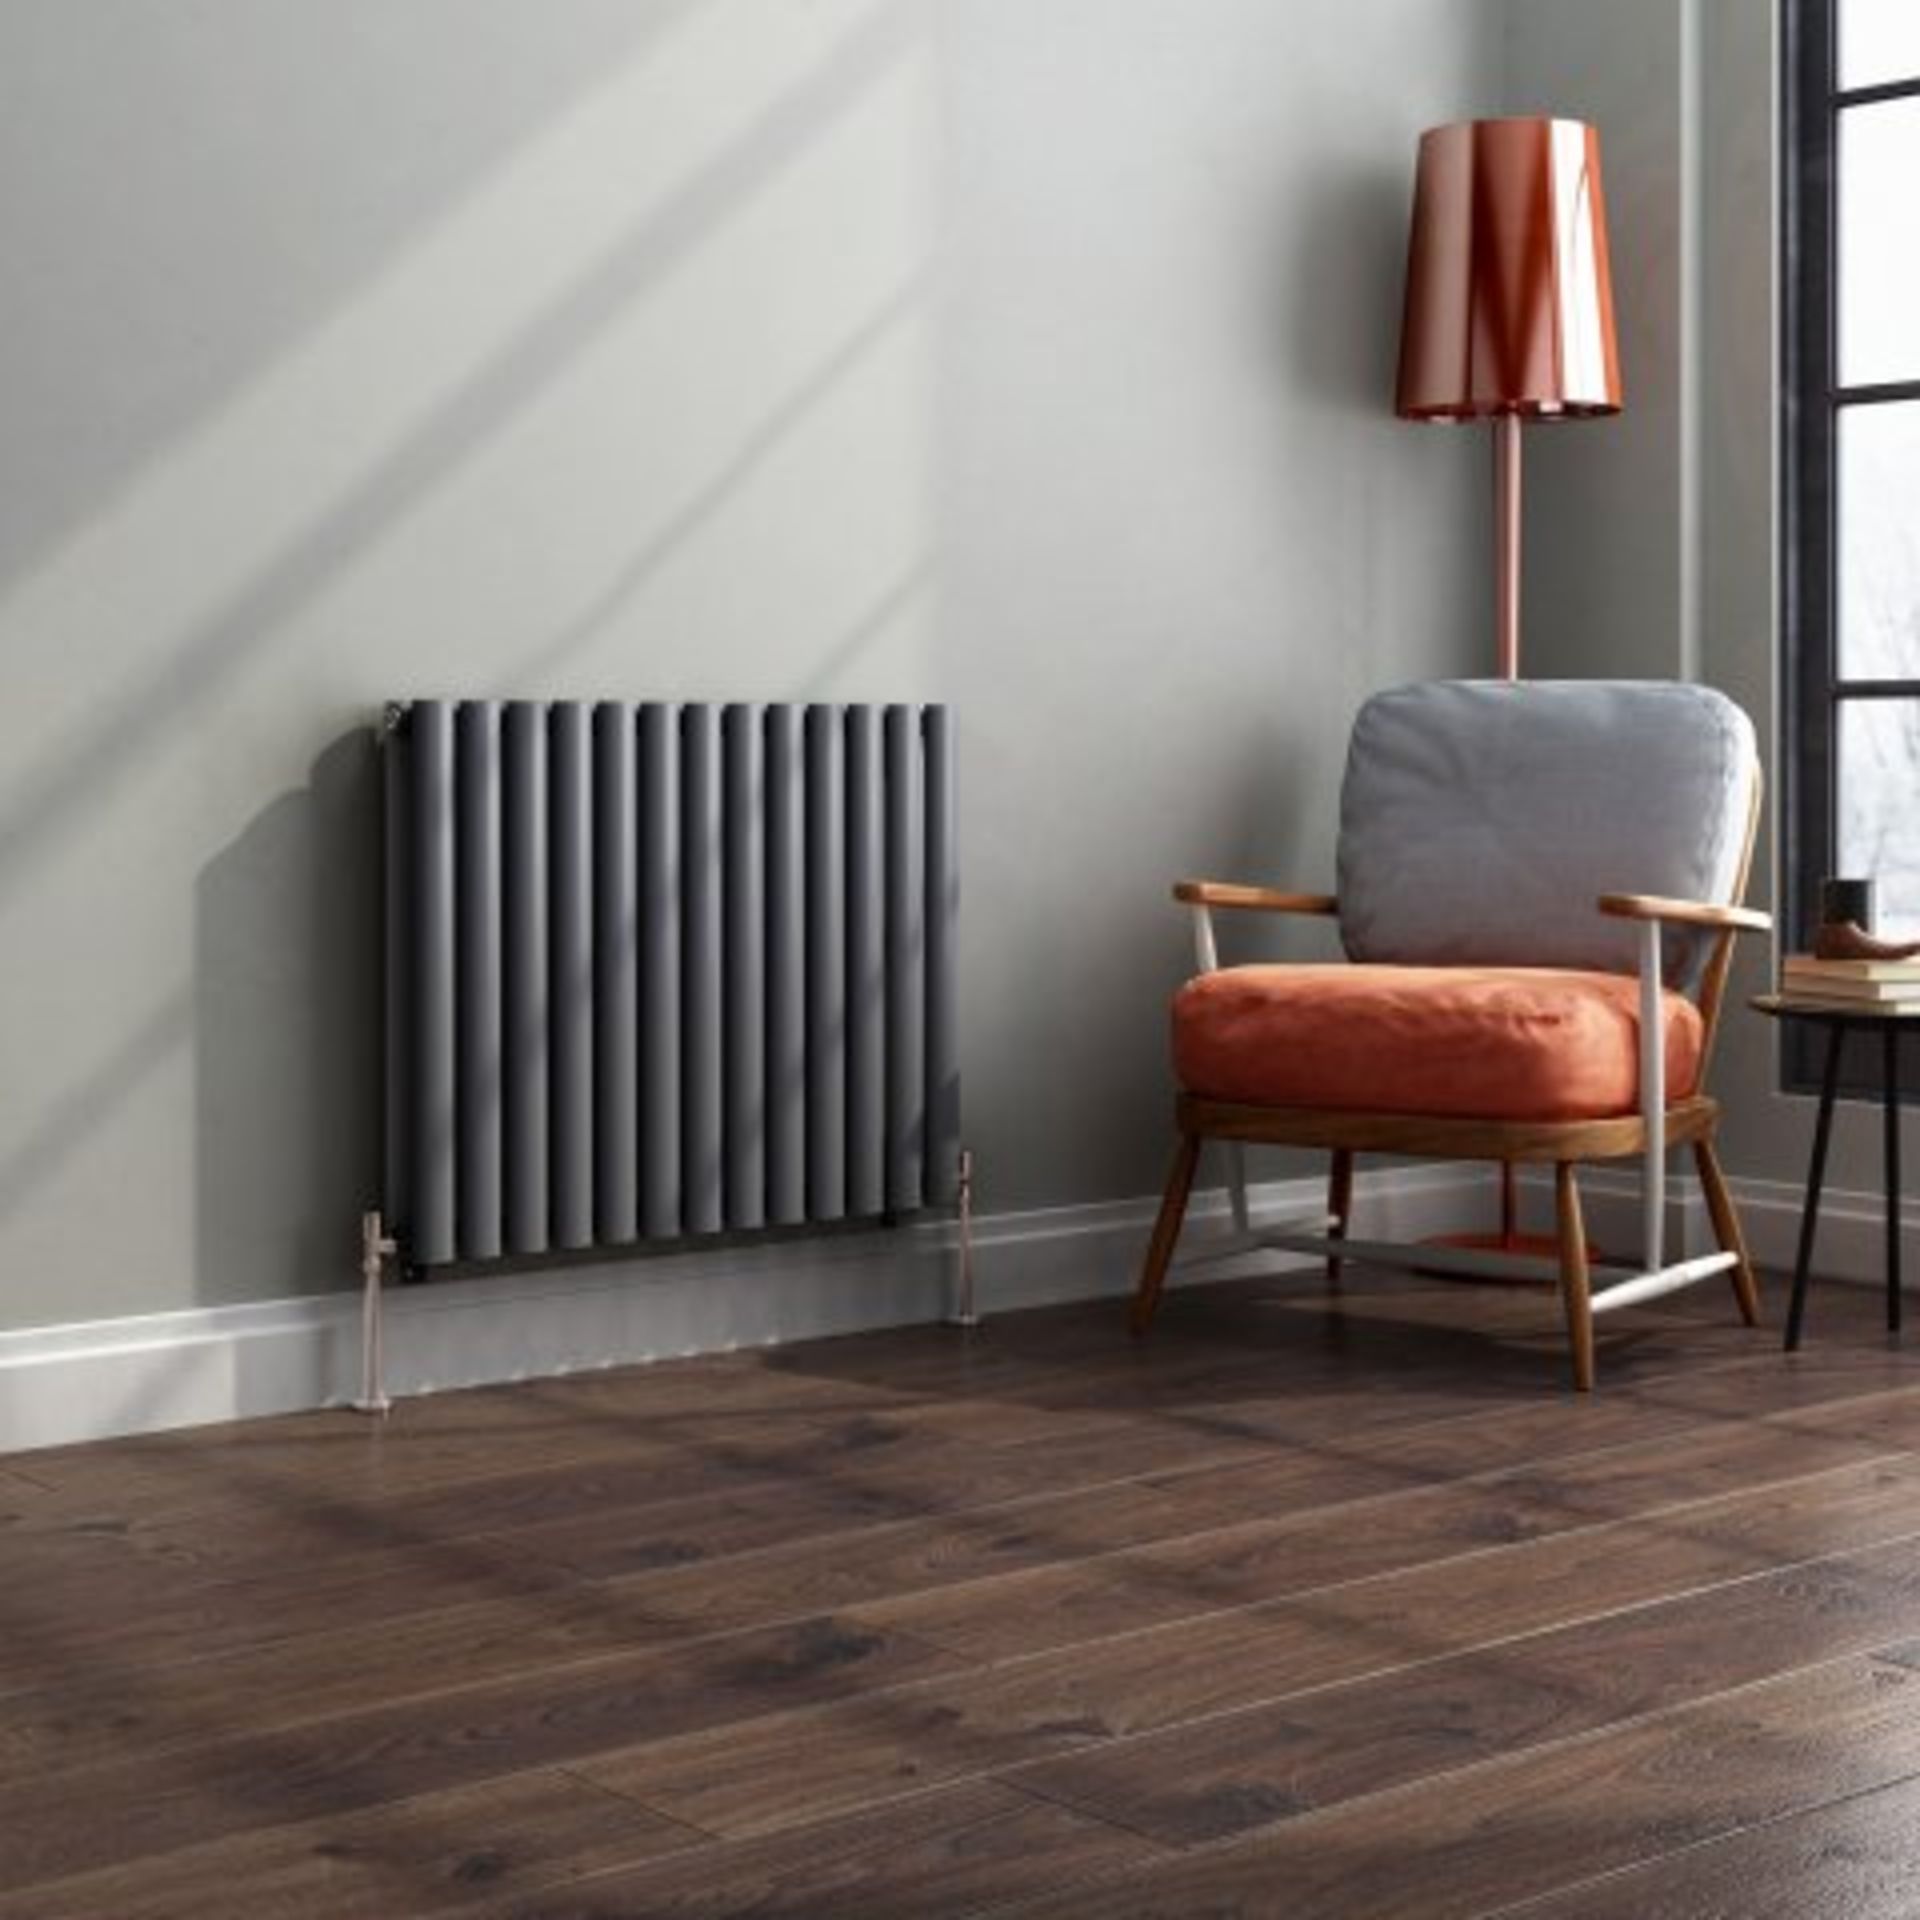 (T6) 600x780mm Anthracite Double Panel Oval Tube Horizontal Radiator. RRP £243.18. Designer Touch - Image 2 of 5